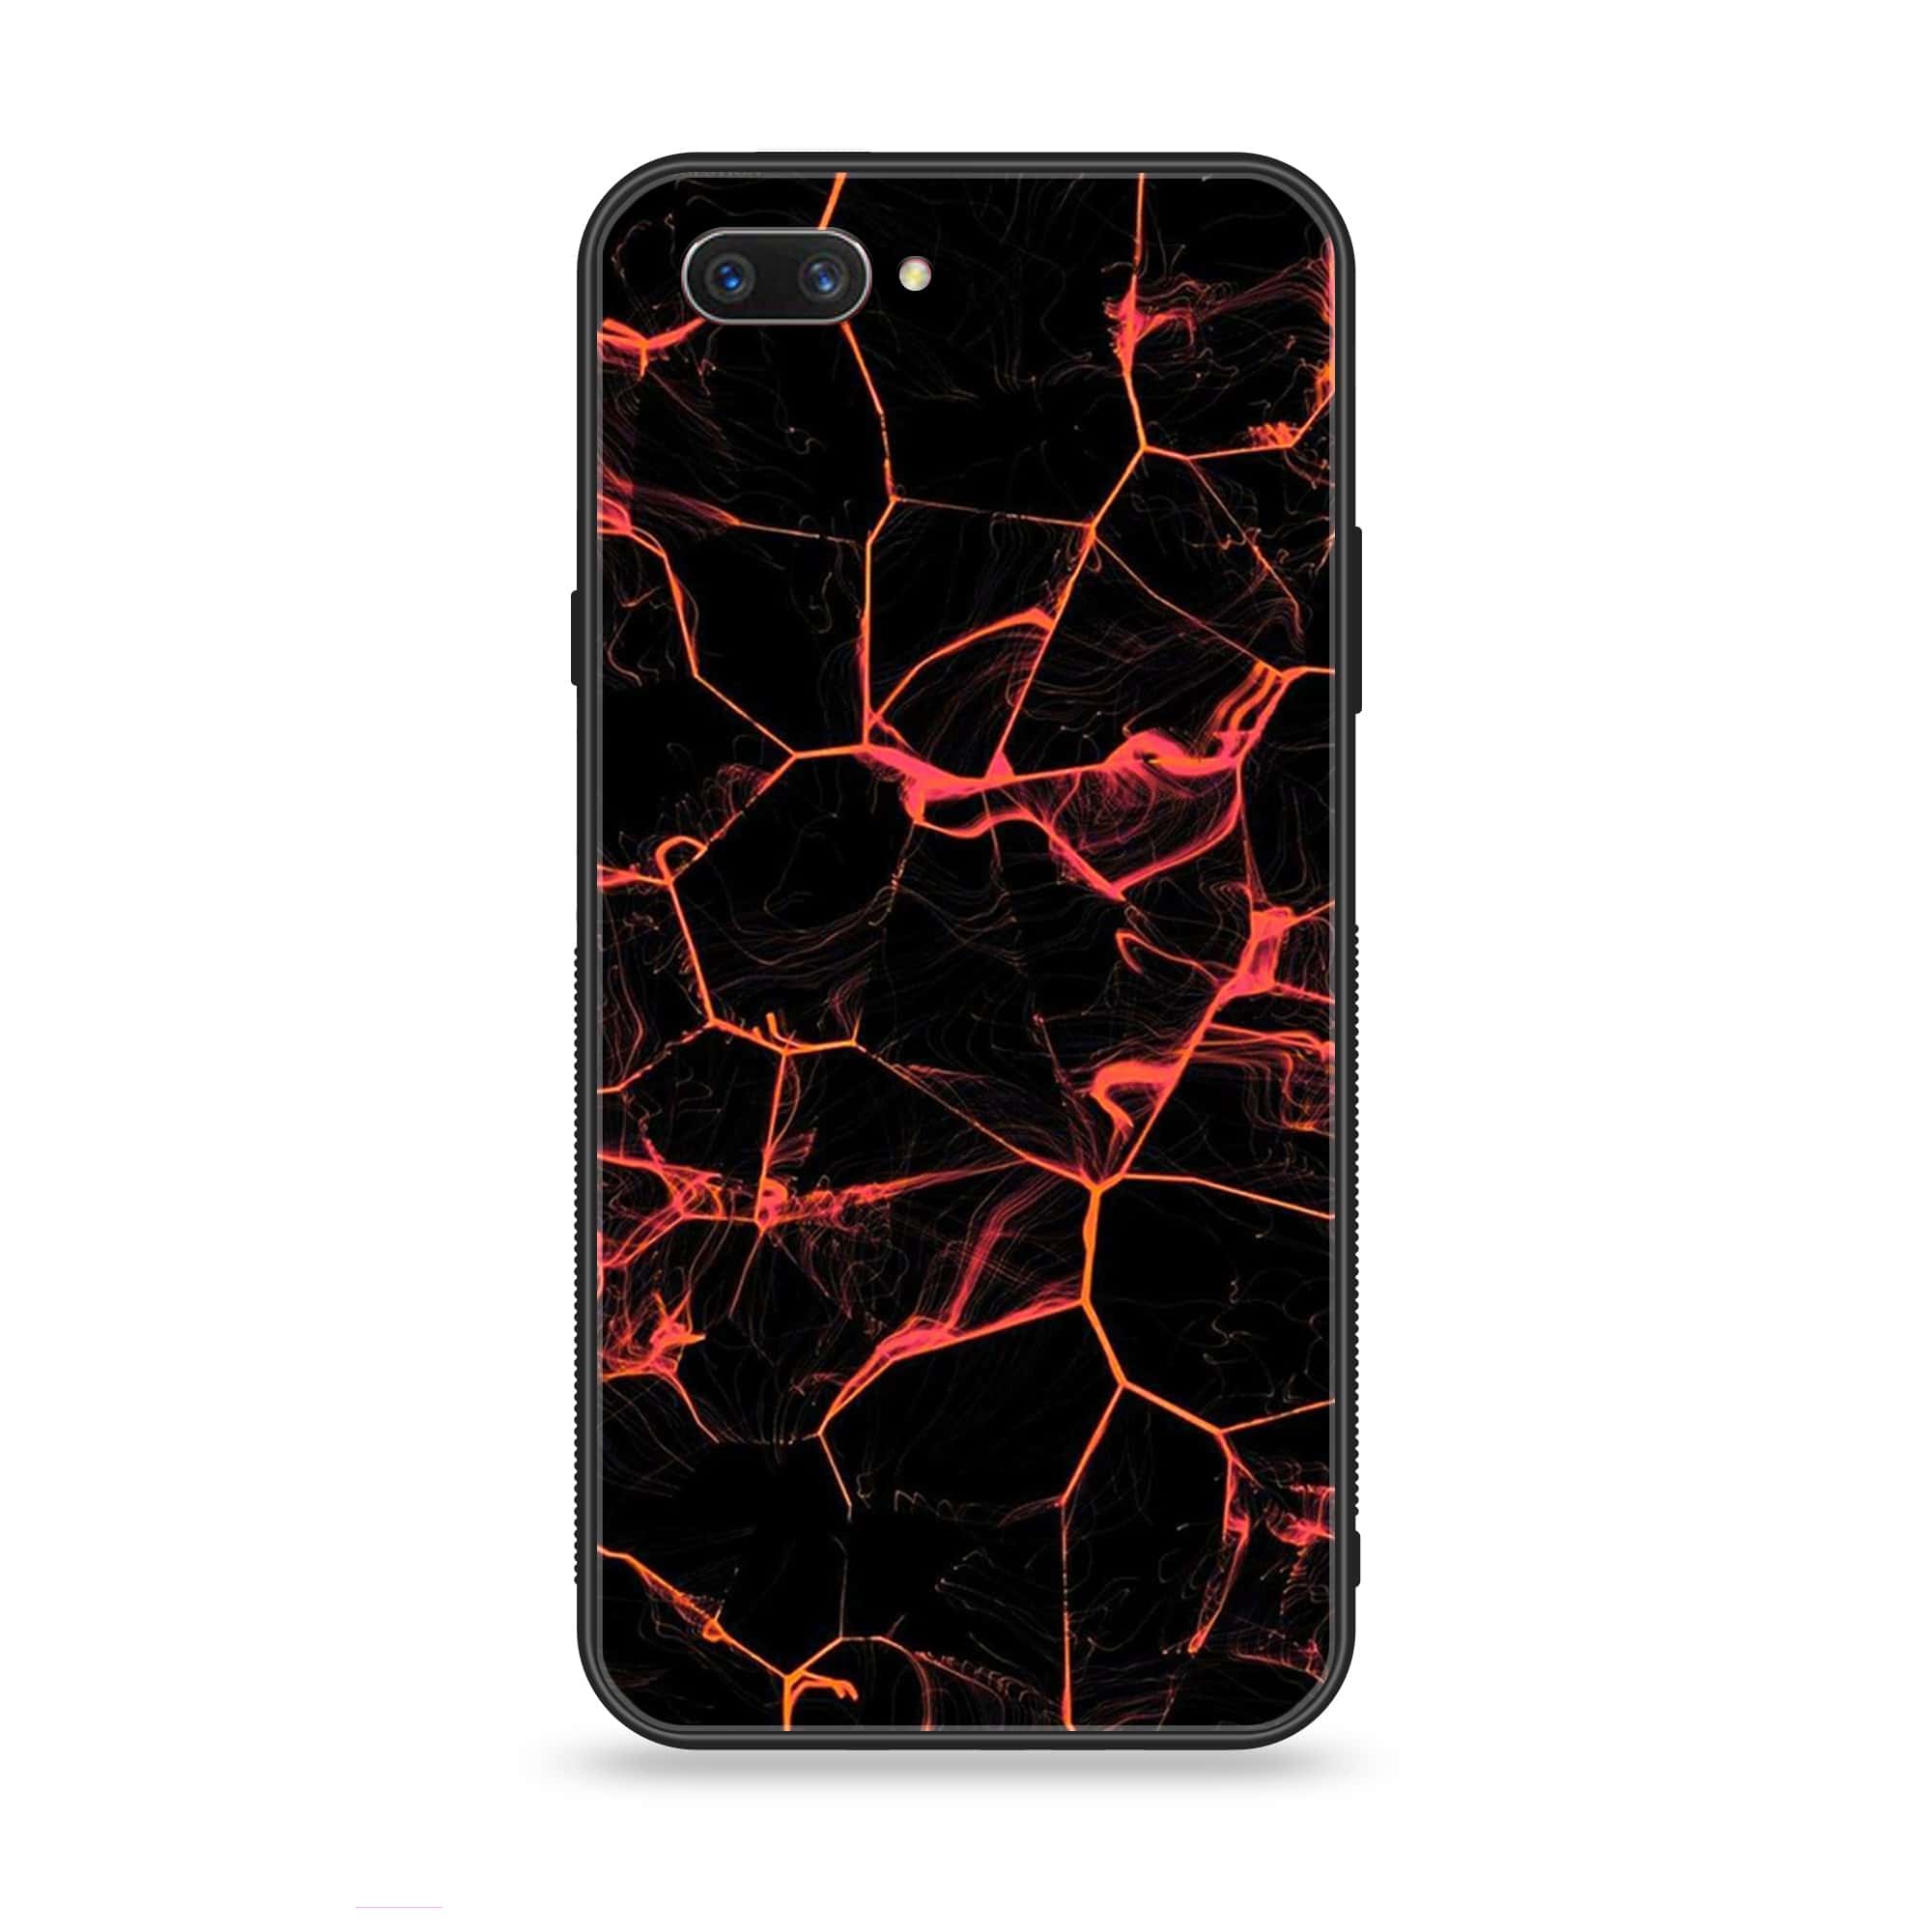 Oppo A3s - Black Marble Series - Premium Printed Glass soft Bumper shock Proof Case